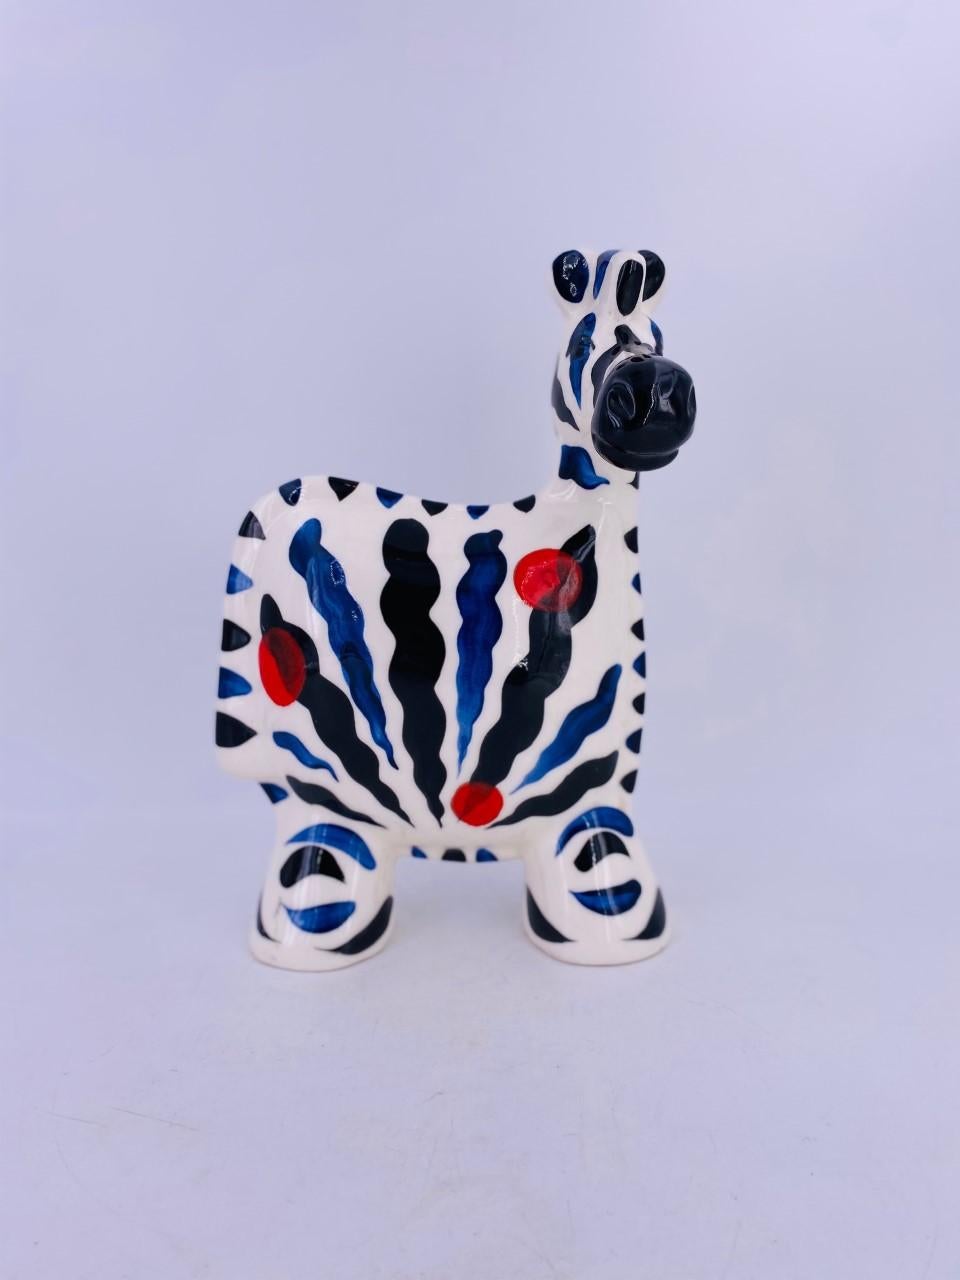 Beautifully crafted Turov Arts of Russia ceramic zebra figure. The figure presents the form in an array of black, blue stripes over a white glaze with red dots intermittent on the figure. Colorful and whimsical. This is a piece that adds color and